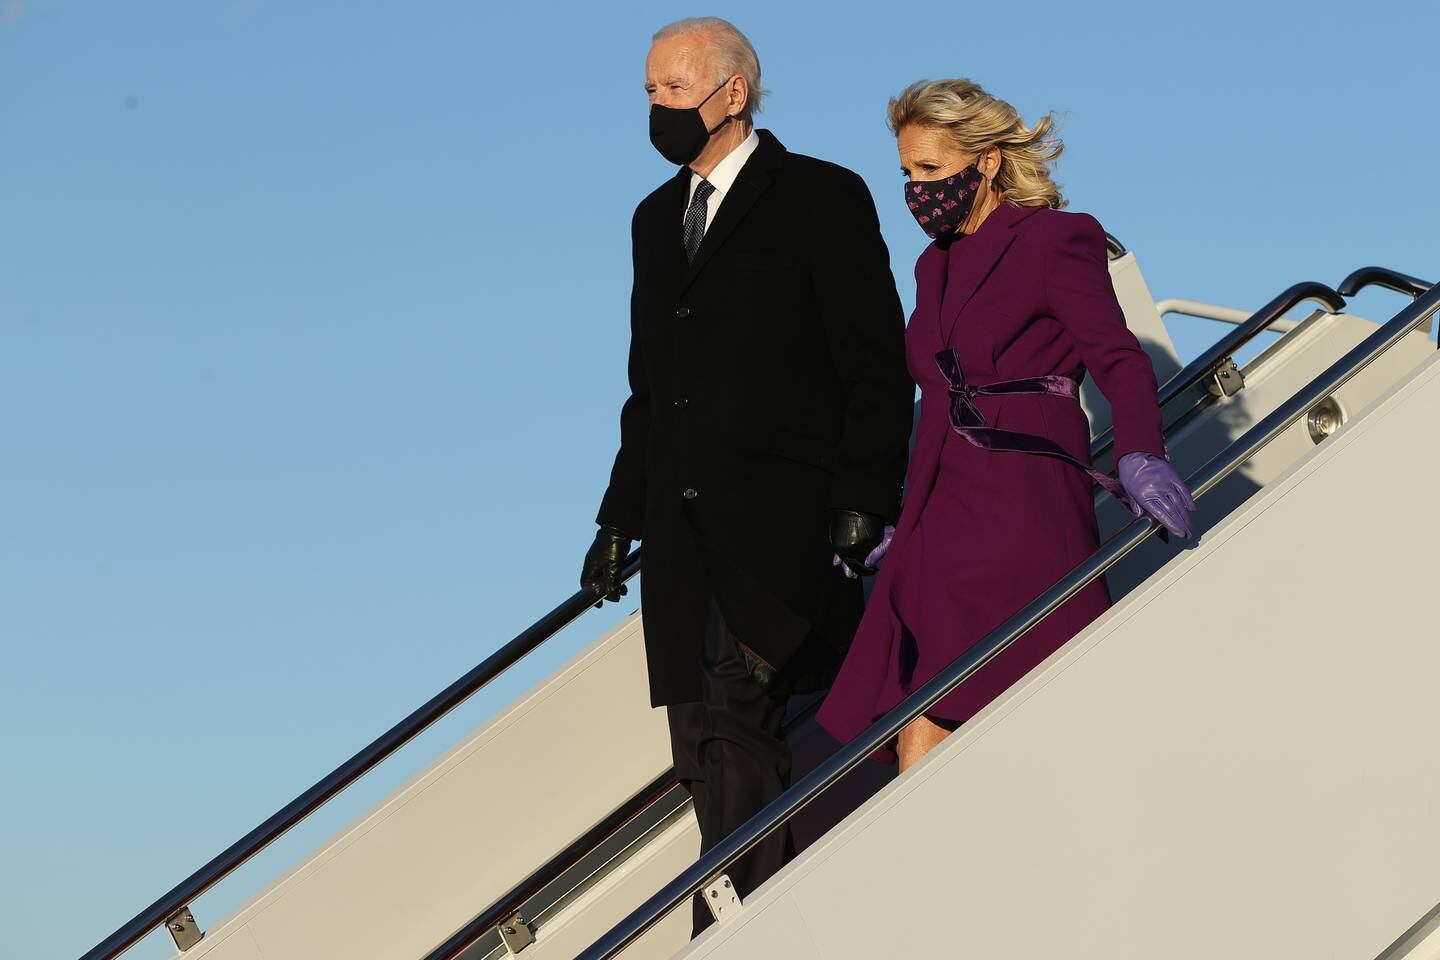 President-elect Joe Biden and Jill Biden arrive in Washington, D.C., and the future first lady wears an outfit by designer Jonathan Cohen. Chip Somodevilla/Getty Images